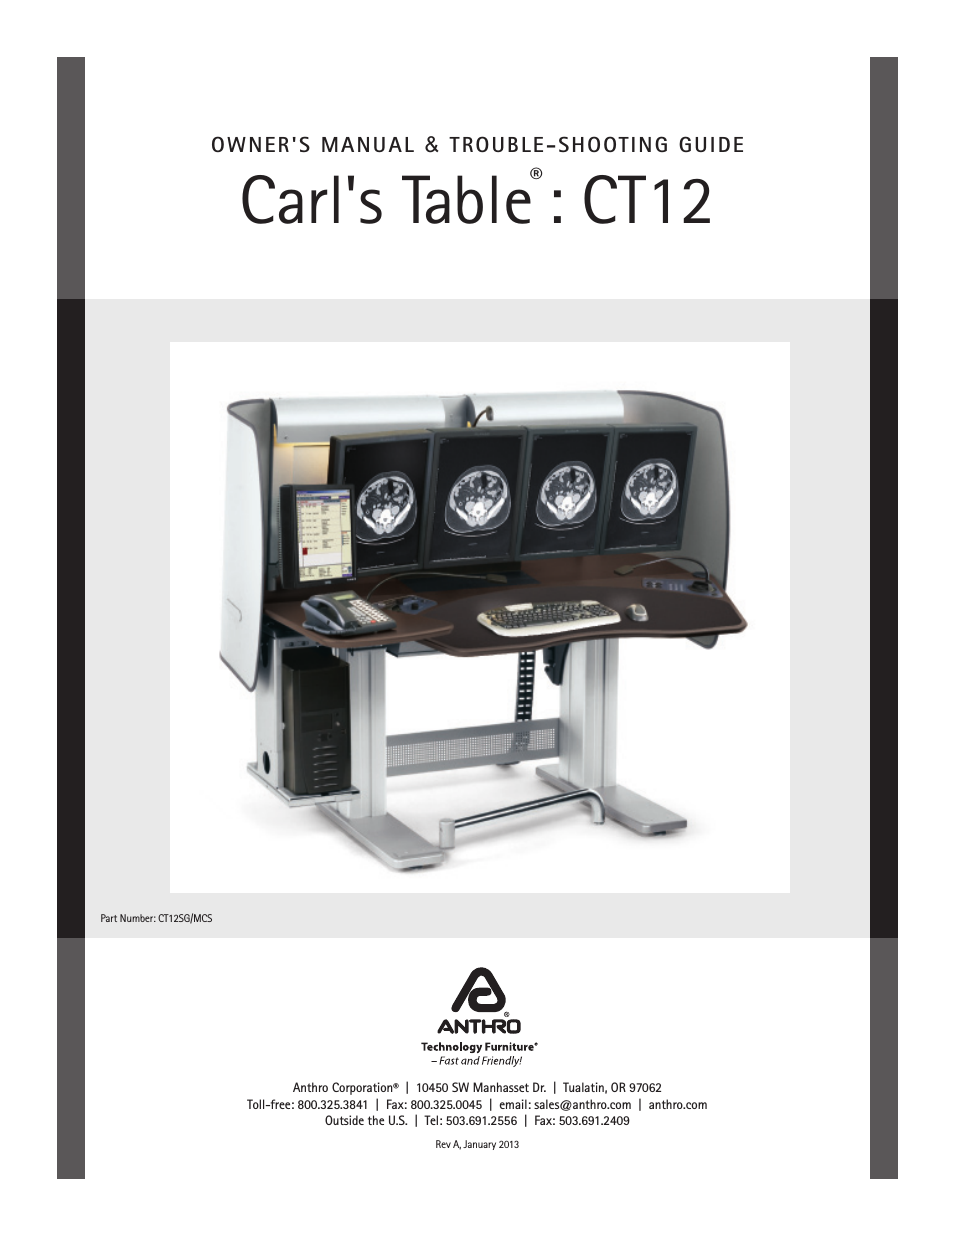 Carl's Table CT12 Owners Manual